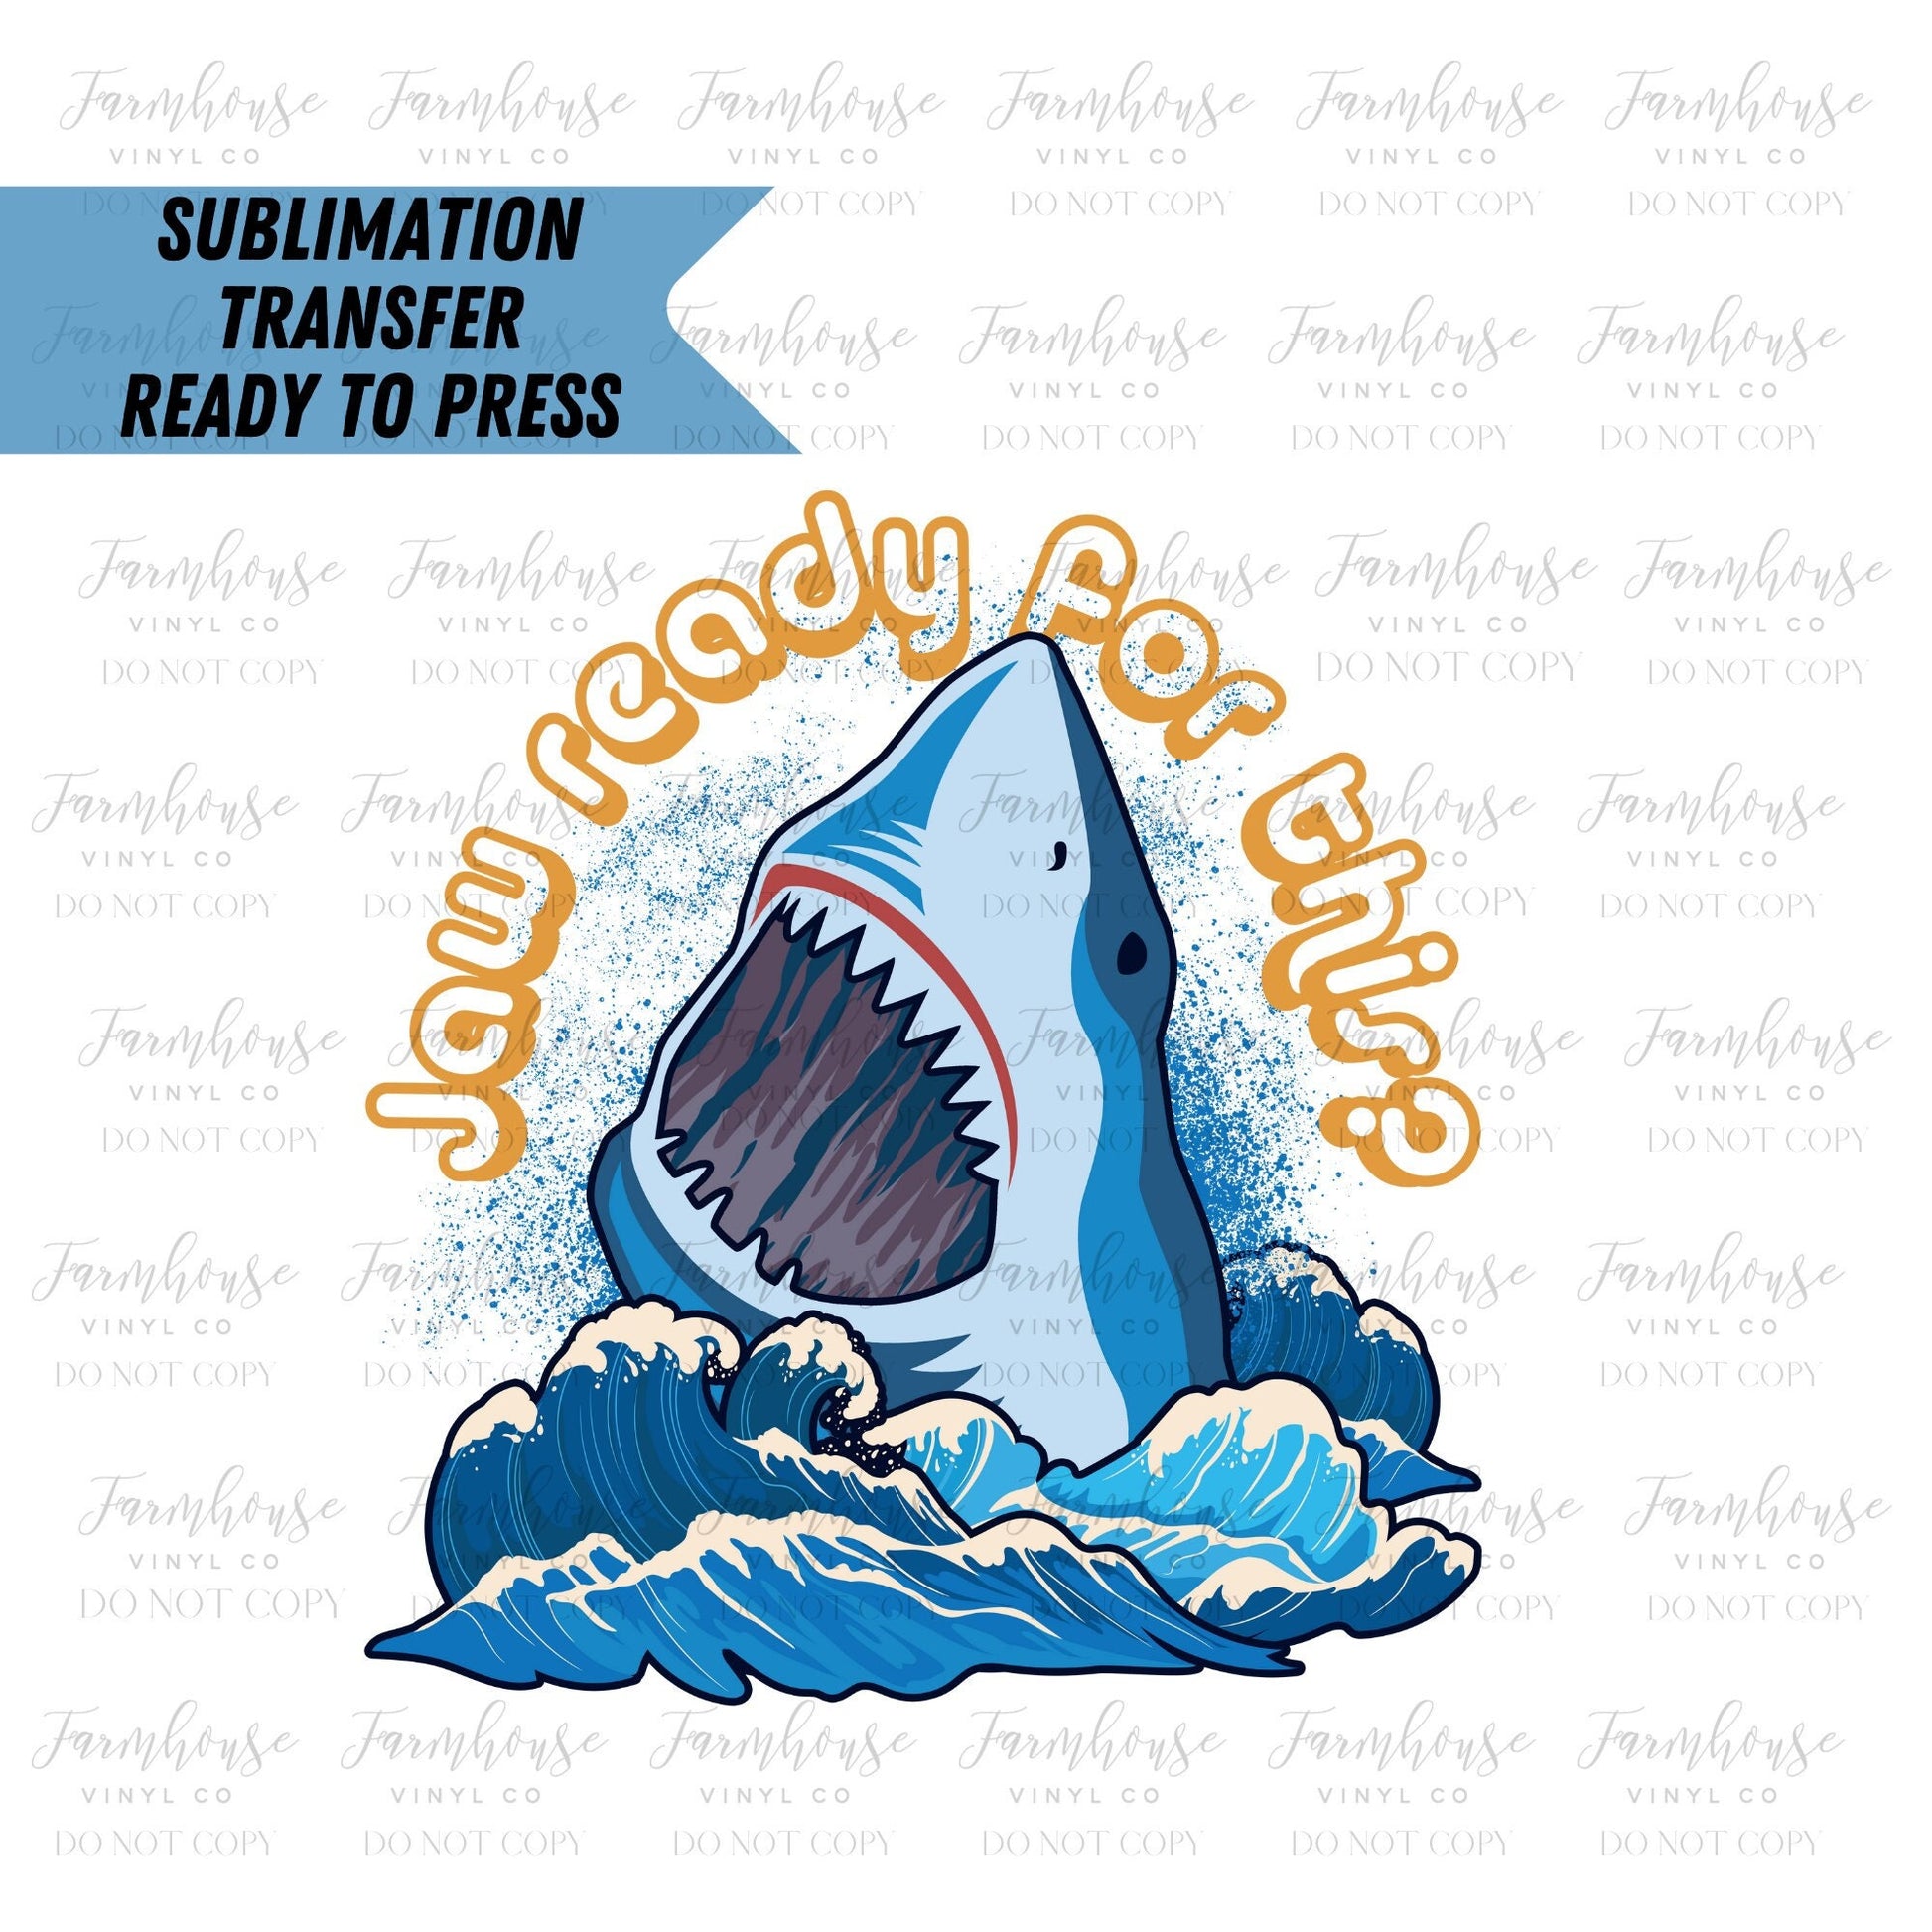 Jaw Ready for this Shark Ready to Press Sublimation Transfer - Farmhouse Vinyl Co